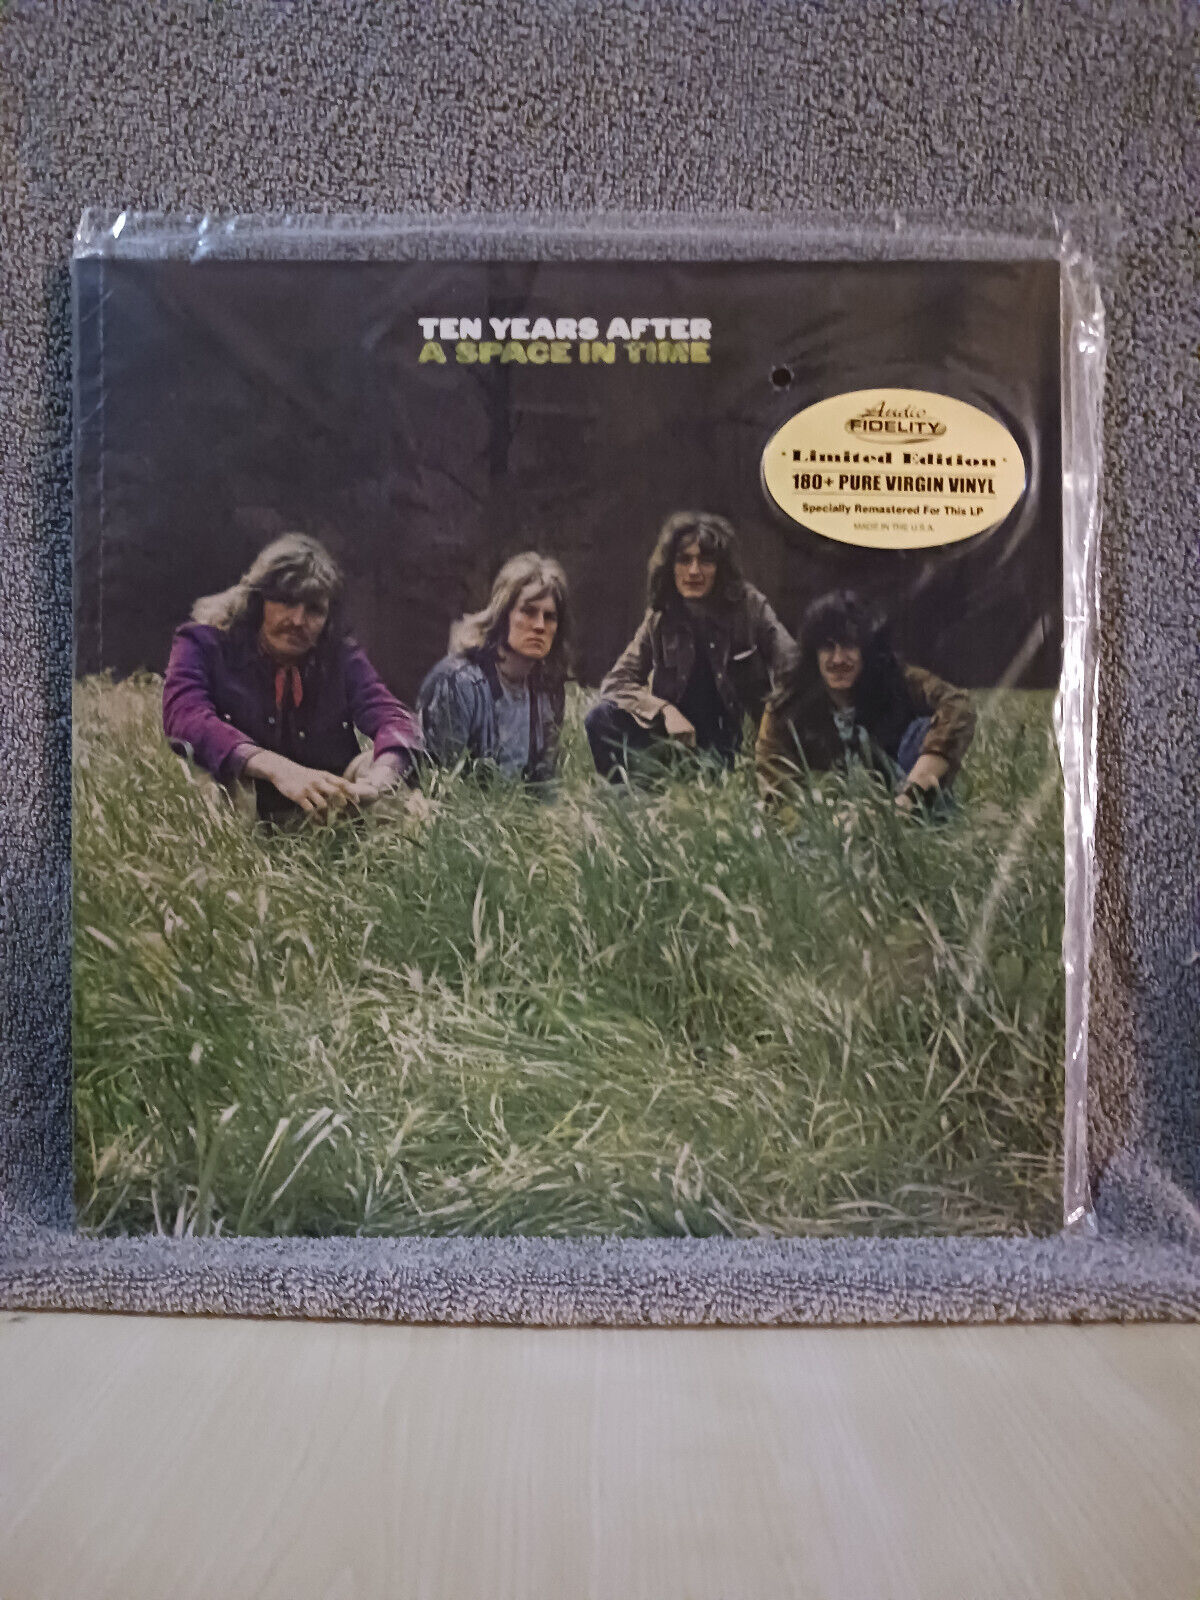 TEN YEARS AFTER "A SPACE IN TIME" *SEALED* AUDIO FIDELITY AUDIOPHILE VINYL #042